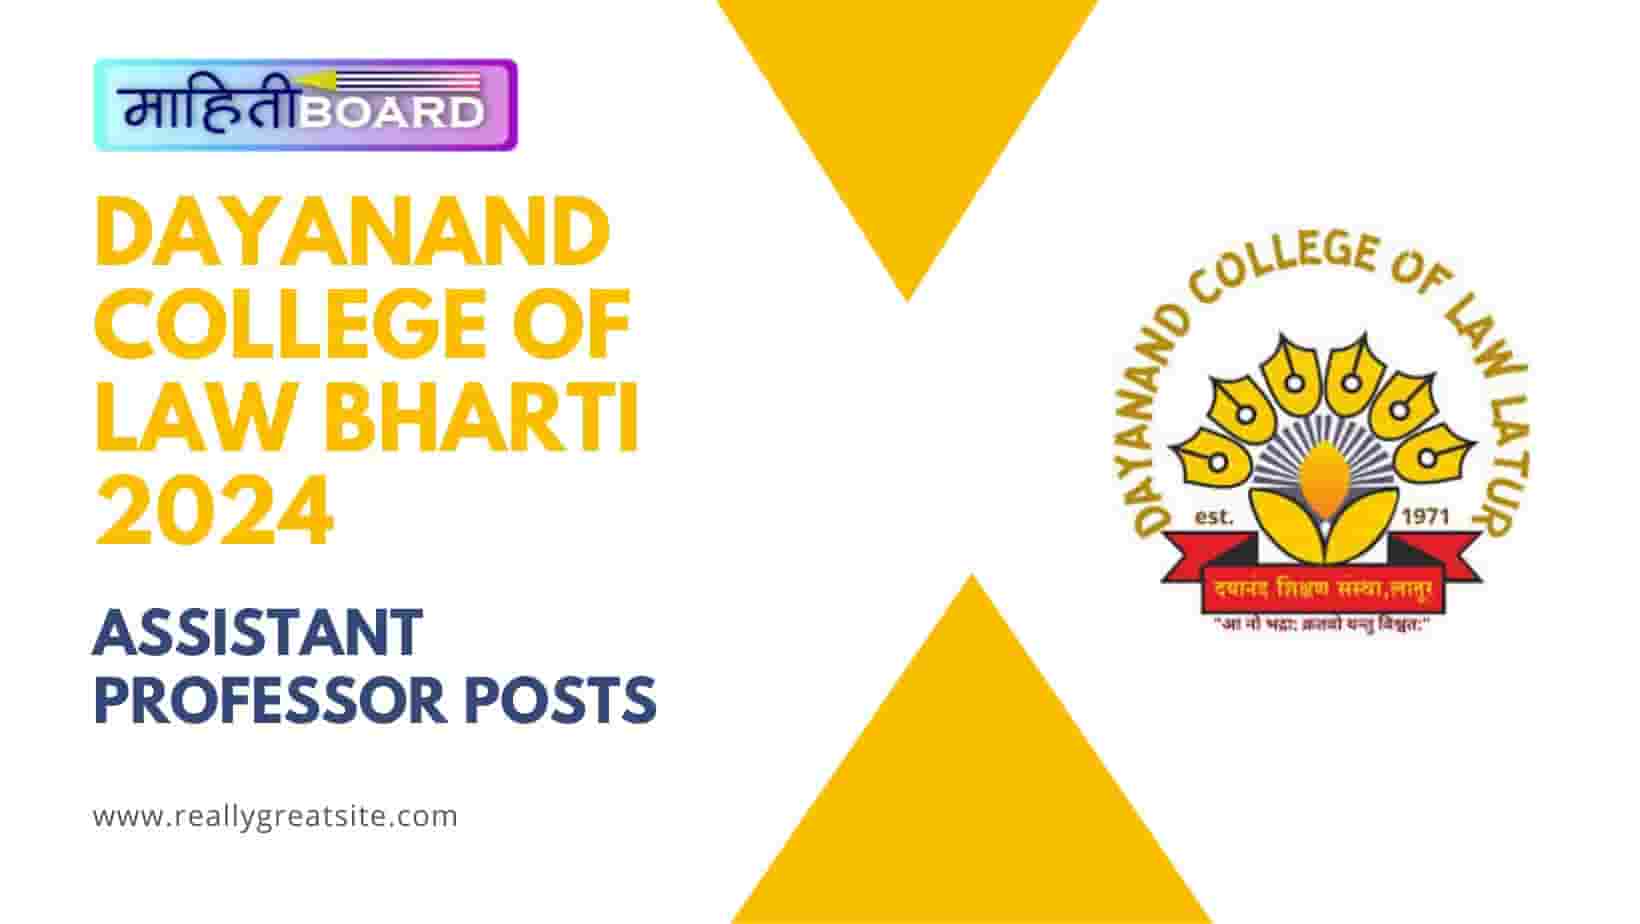 Dayanand College of Law Bharti 2024